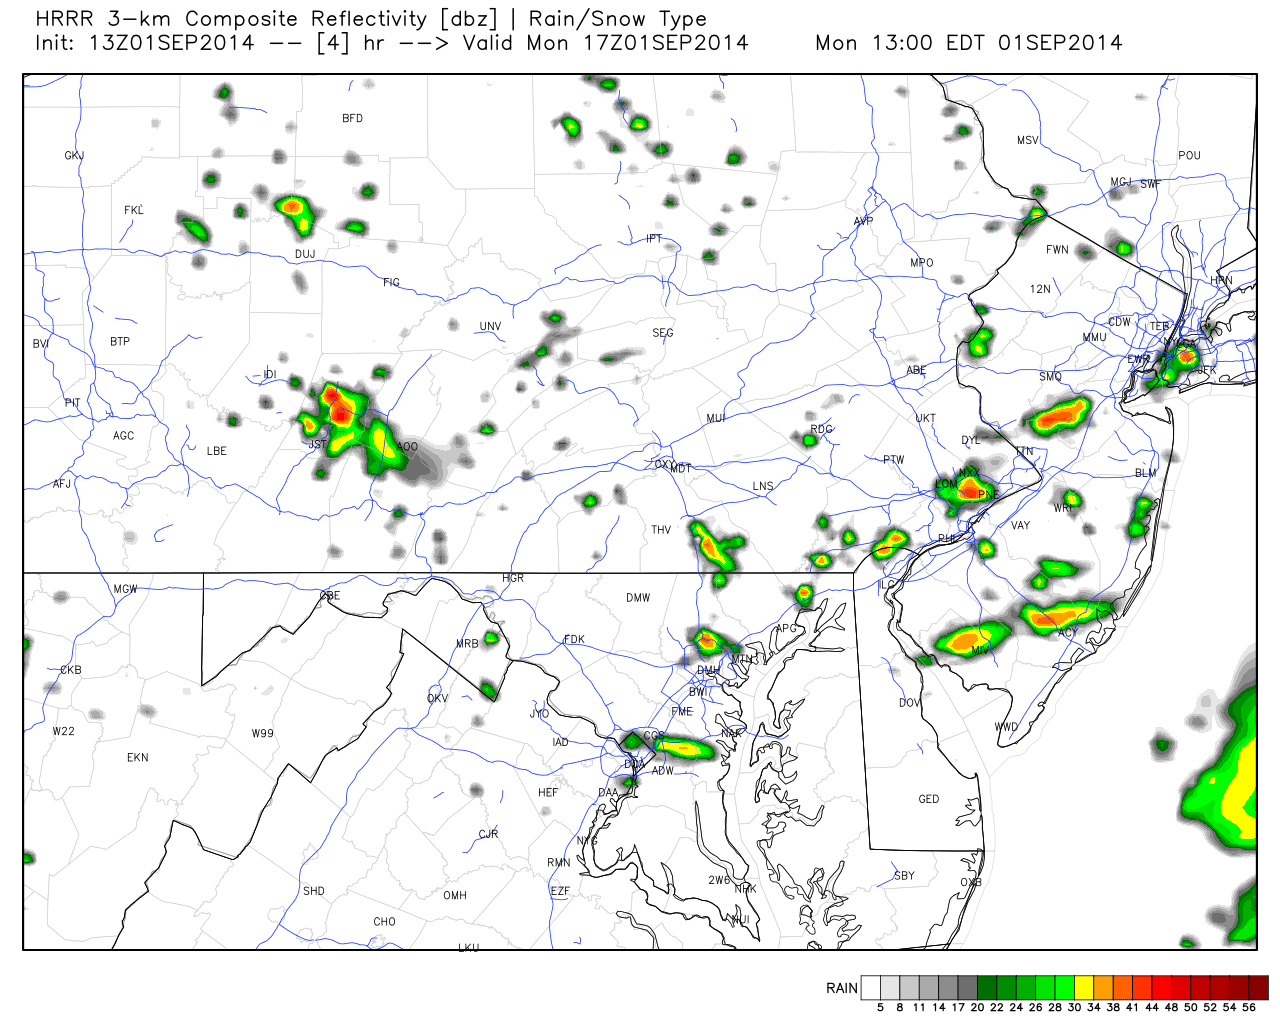 HRRR shows scattered hit-or-miss showers in new jersey for labor day